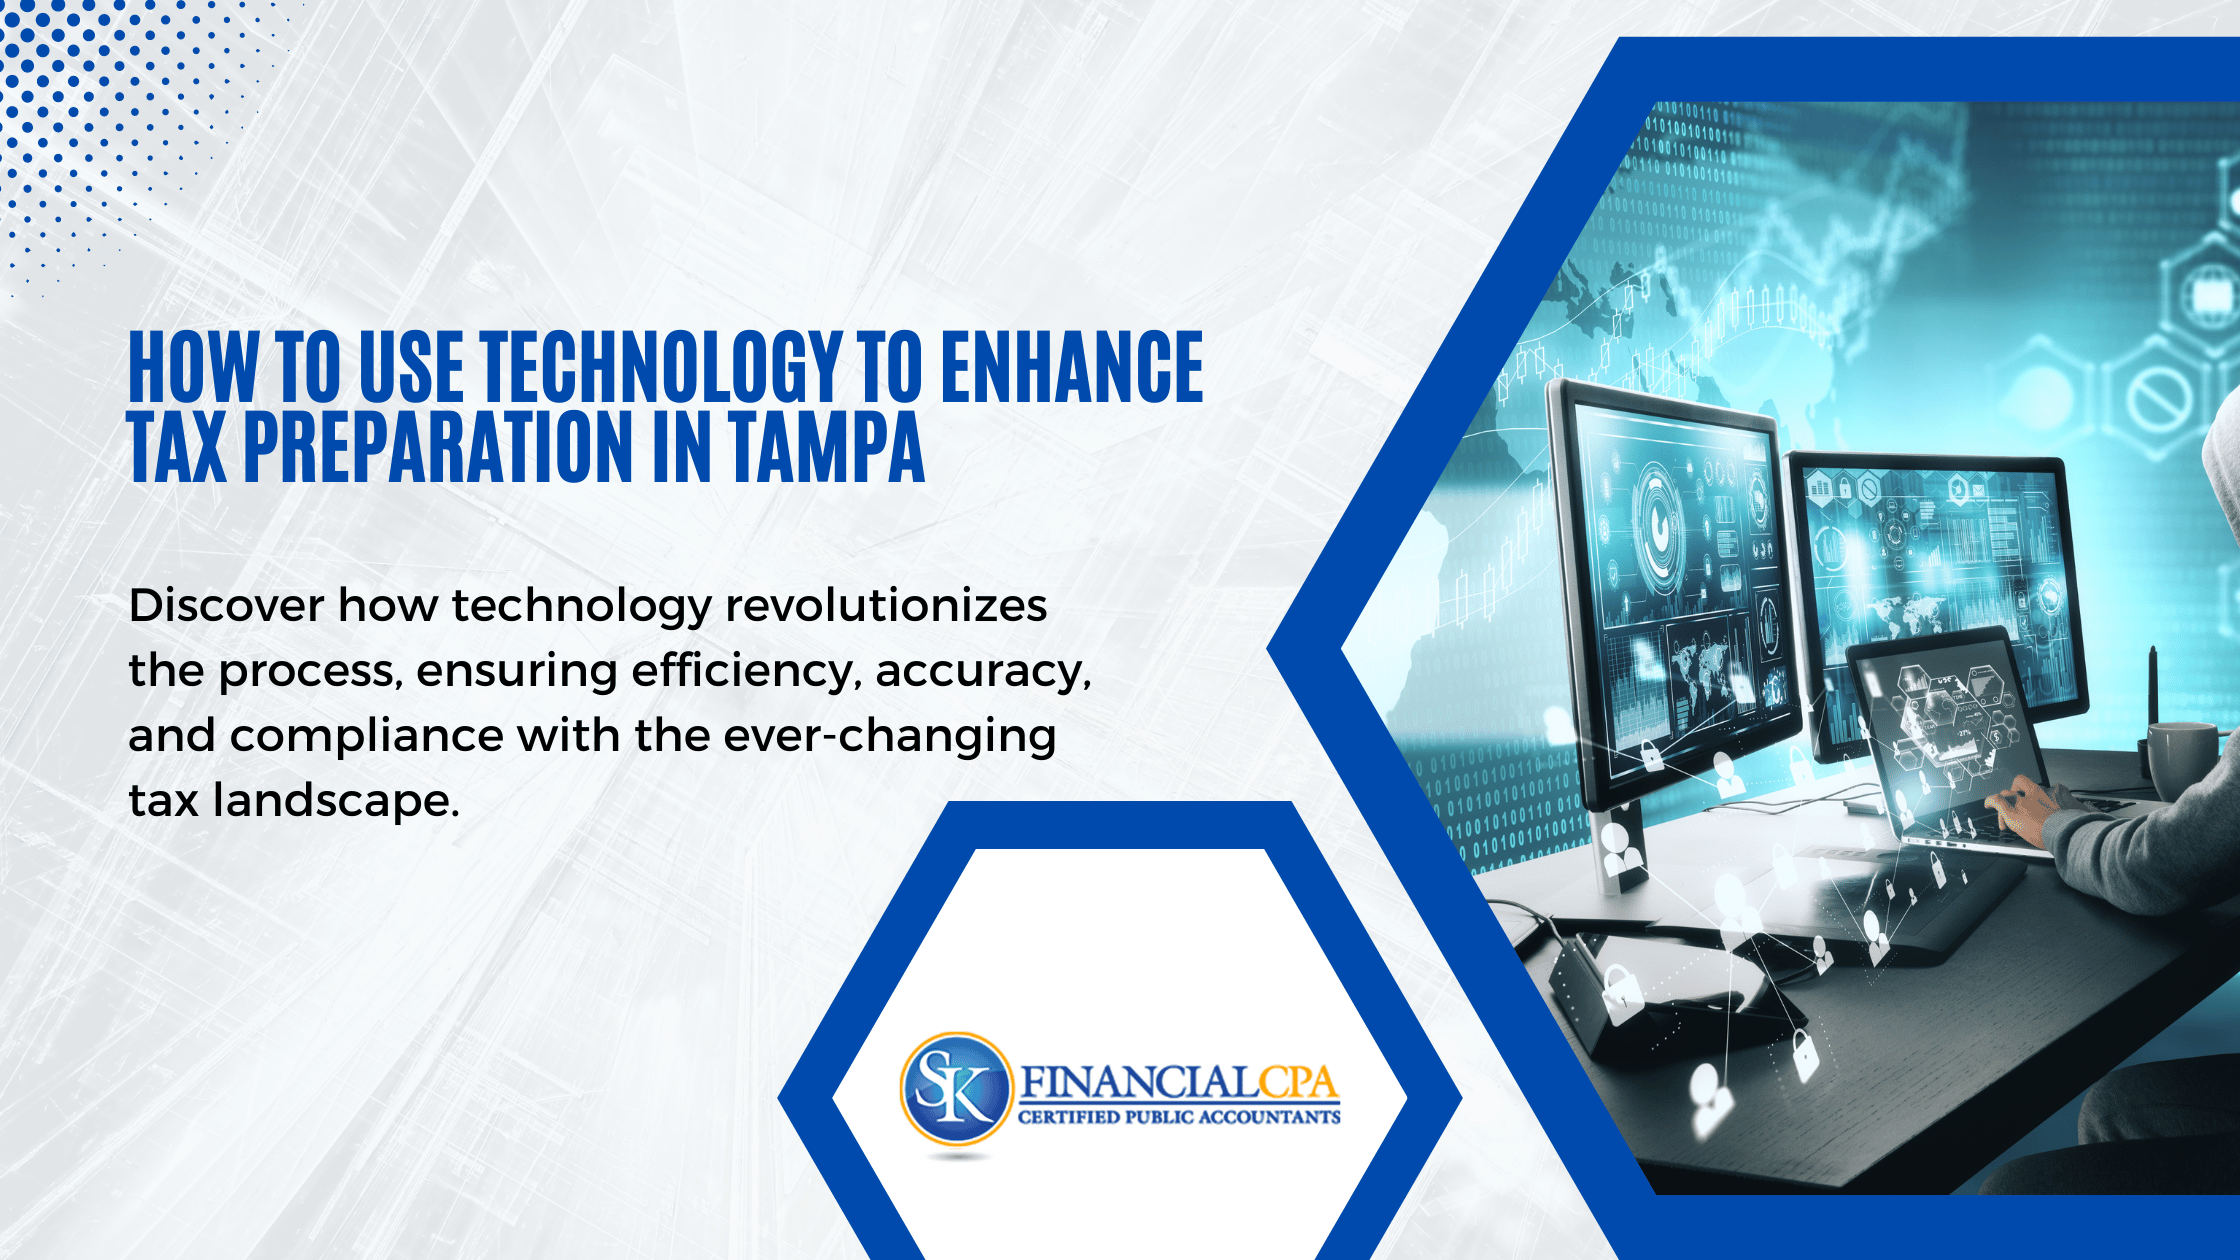 How To Use Technology to Enhance Tax Preparation in Tampa